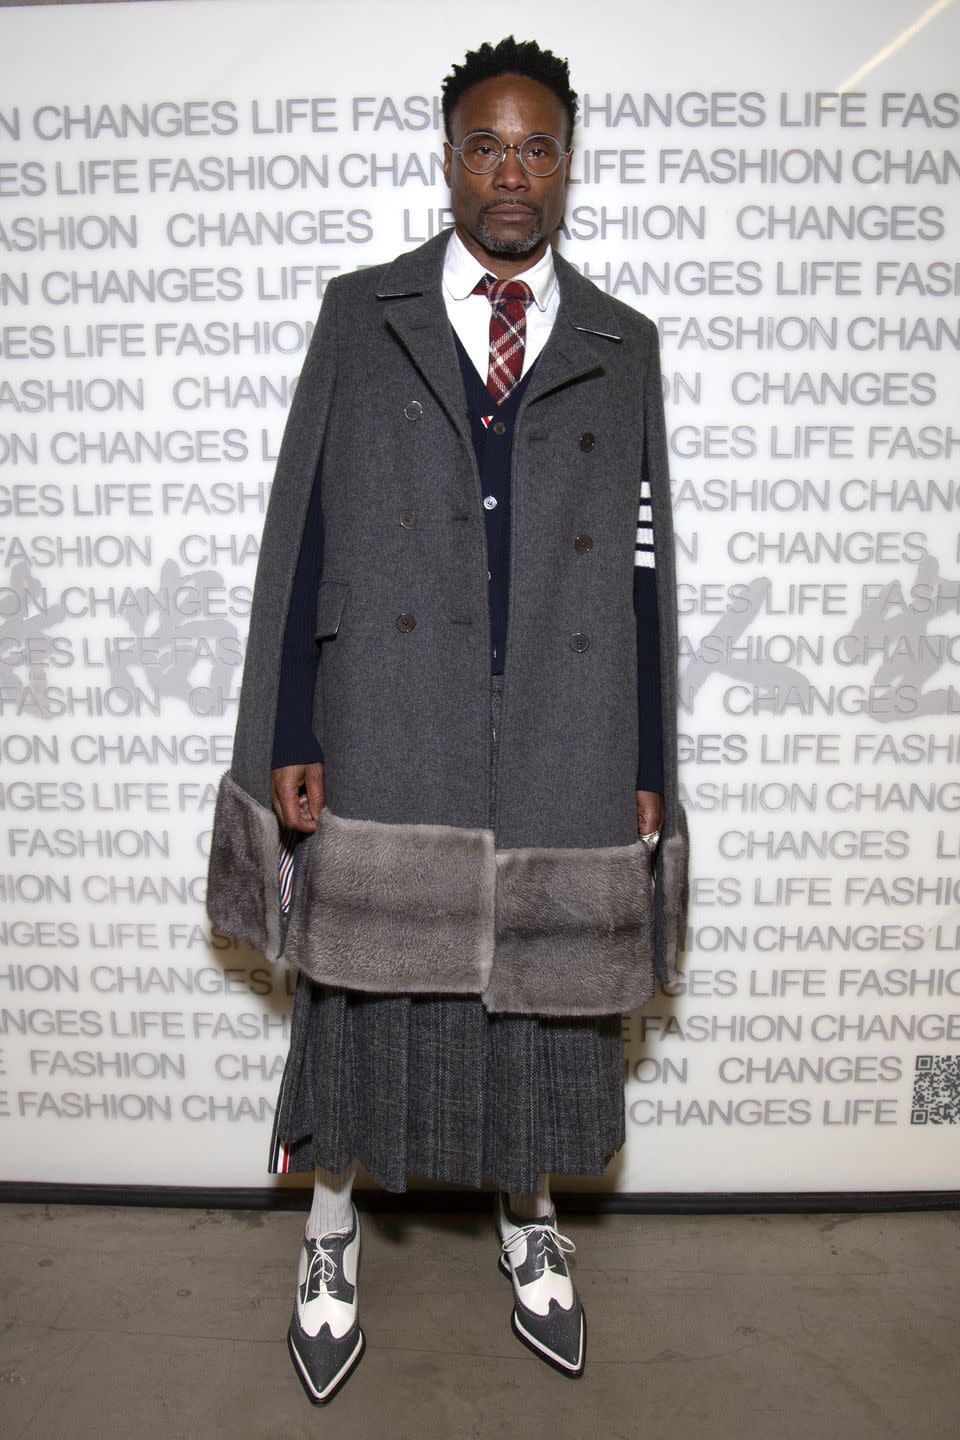 <p>The actor wore an all-grey school uniform-inspired look by Thom Browne to the Fashion Changes Lives event. The star styled the look with an oversize grey cape, navy blue cardigan, grey pleated skirt, grey and white lace-up brogues, white shirt and red tie. </p>